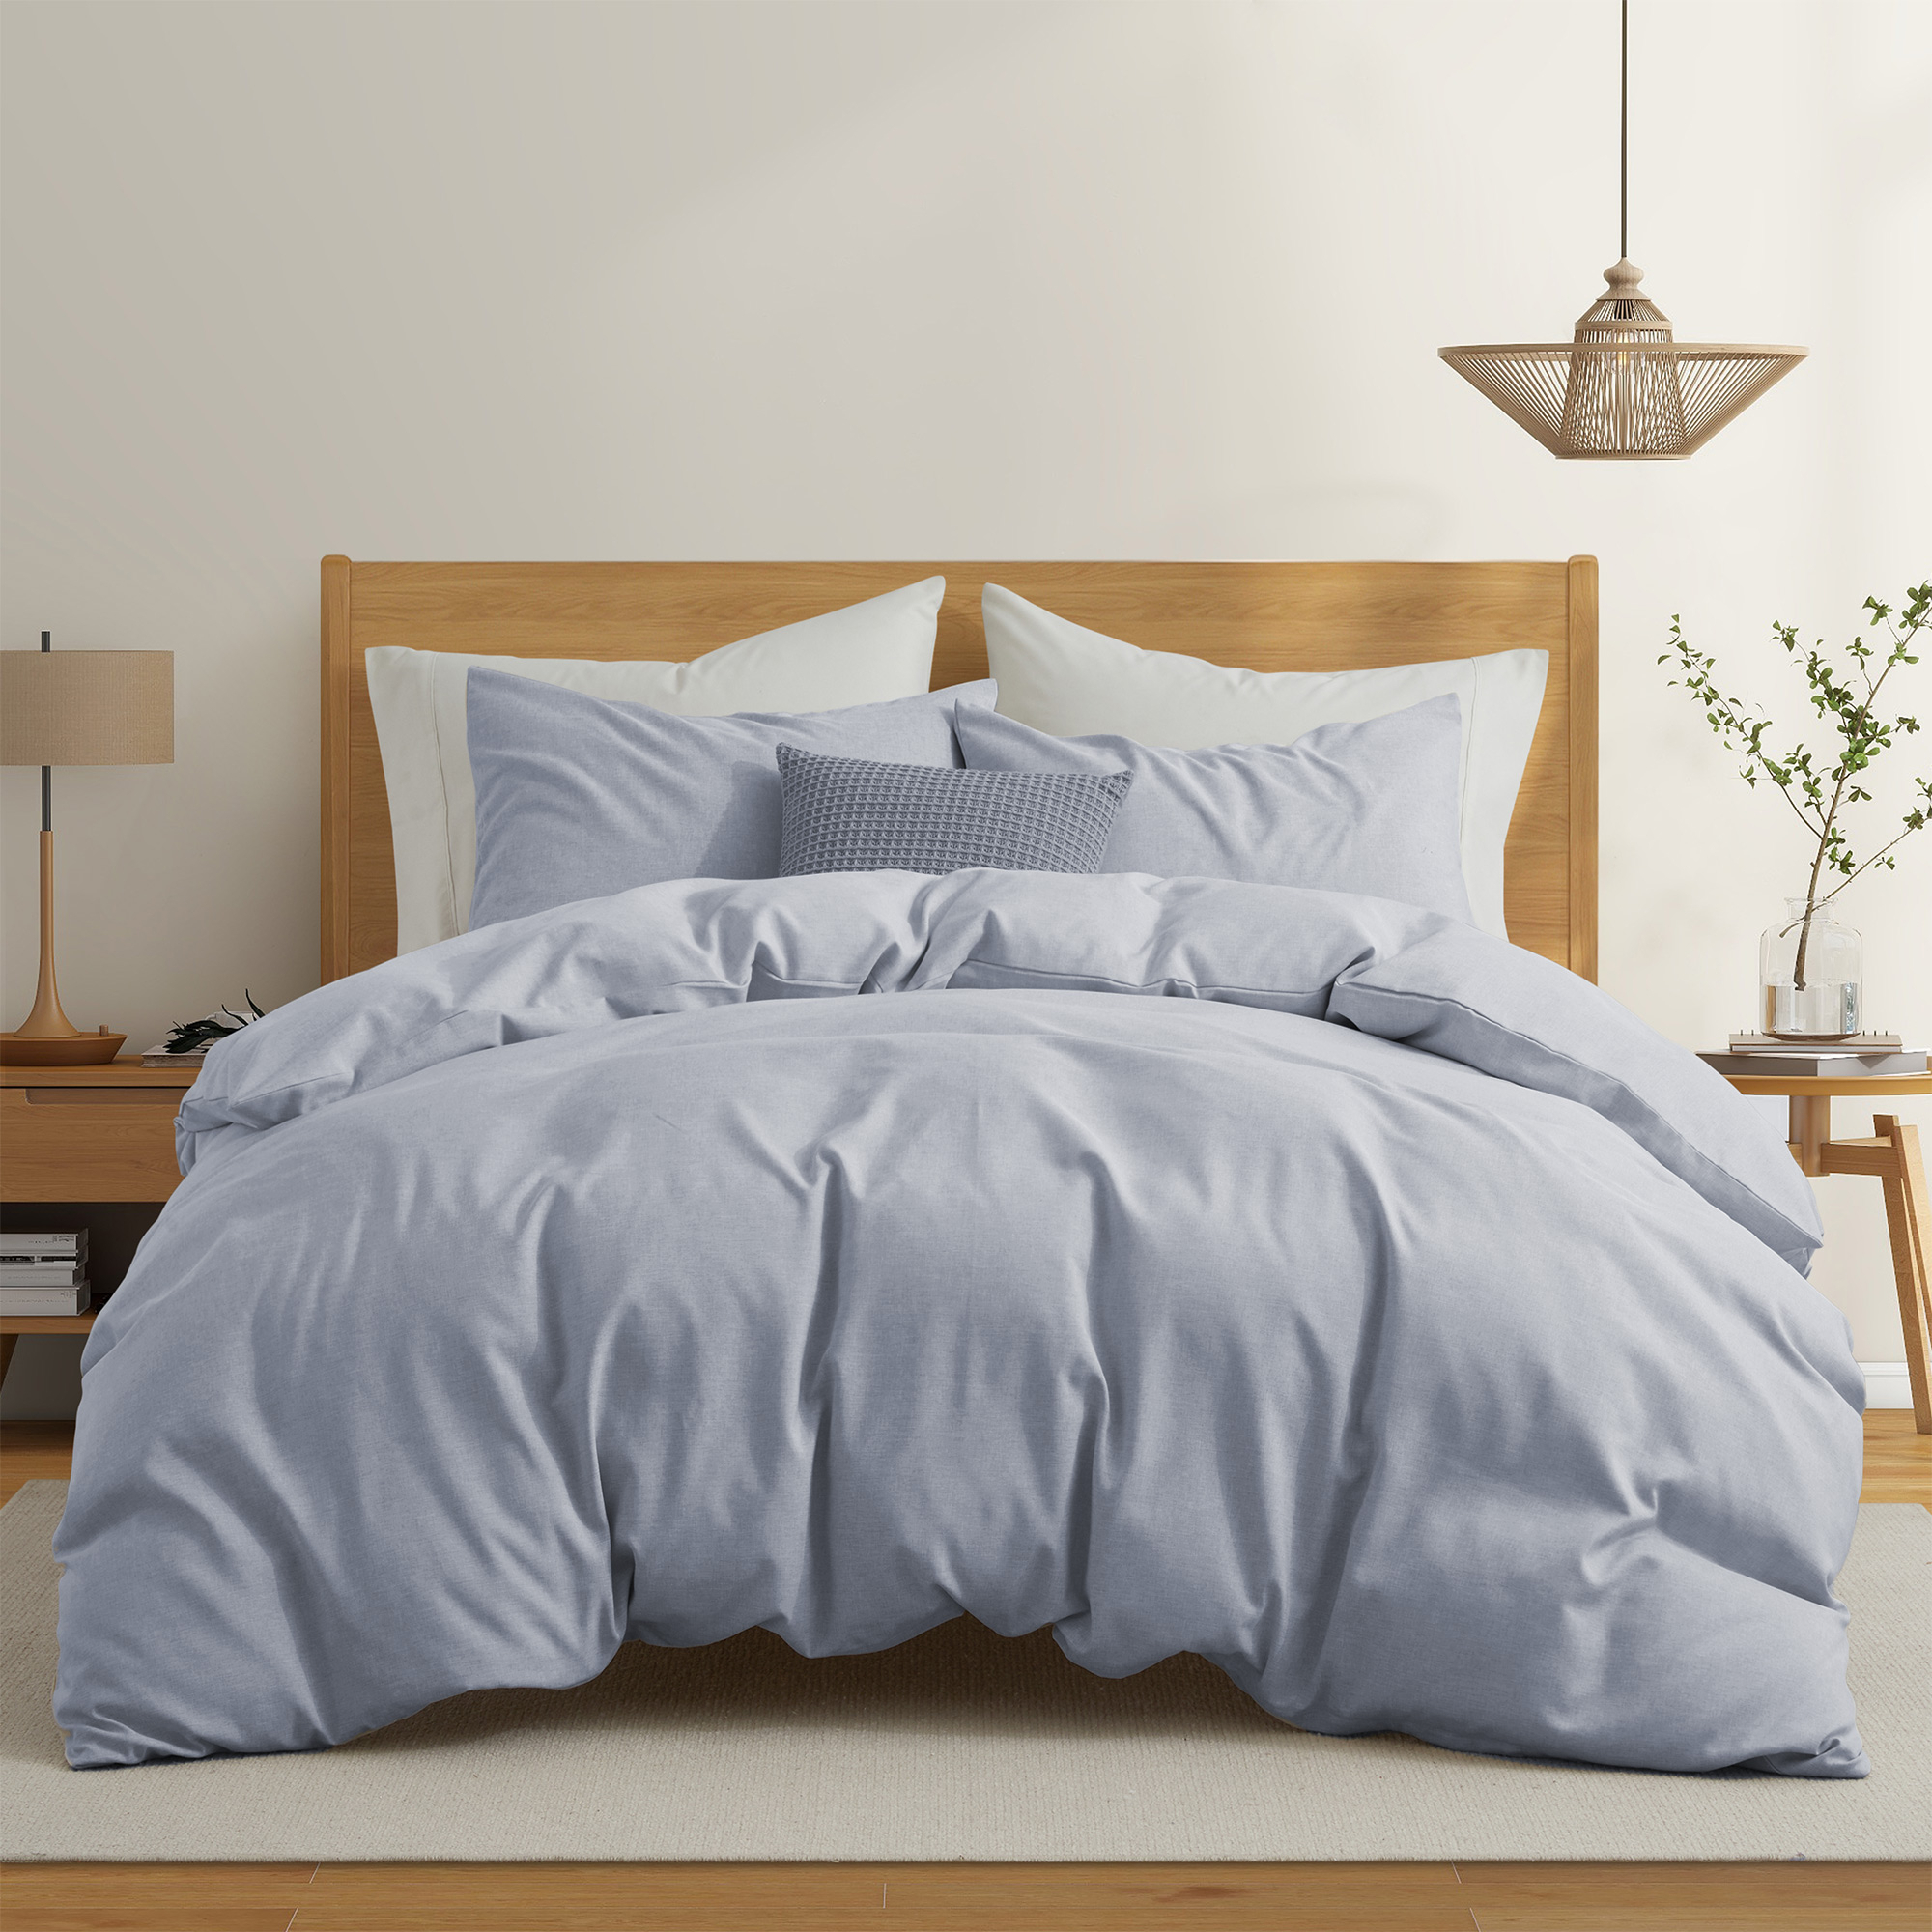 Solid Faux Linen Duvet Cover Set With Shams - Luxurious Comfort - Navy, King-90x106